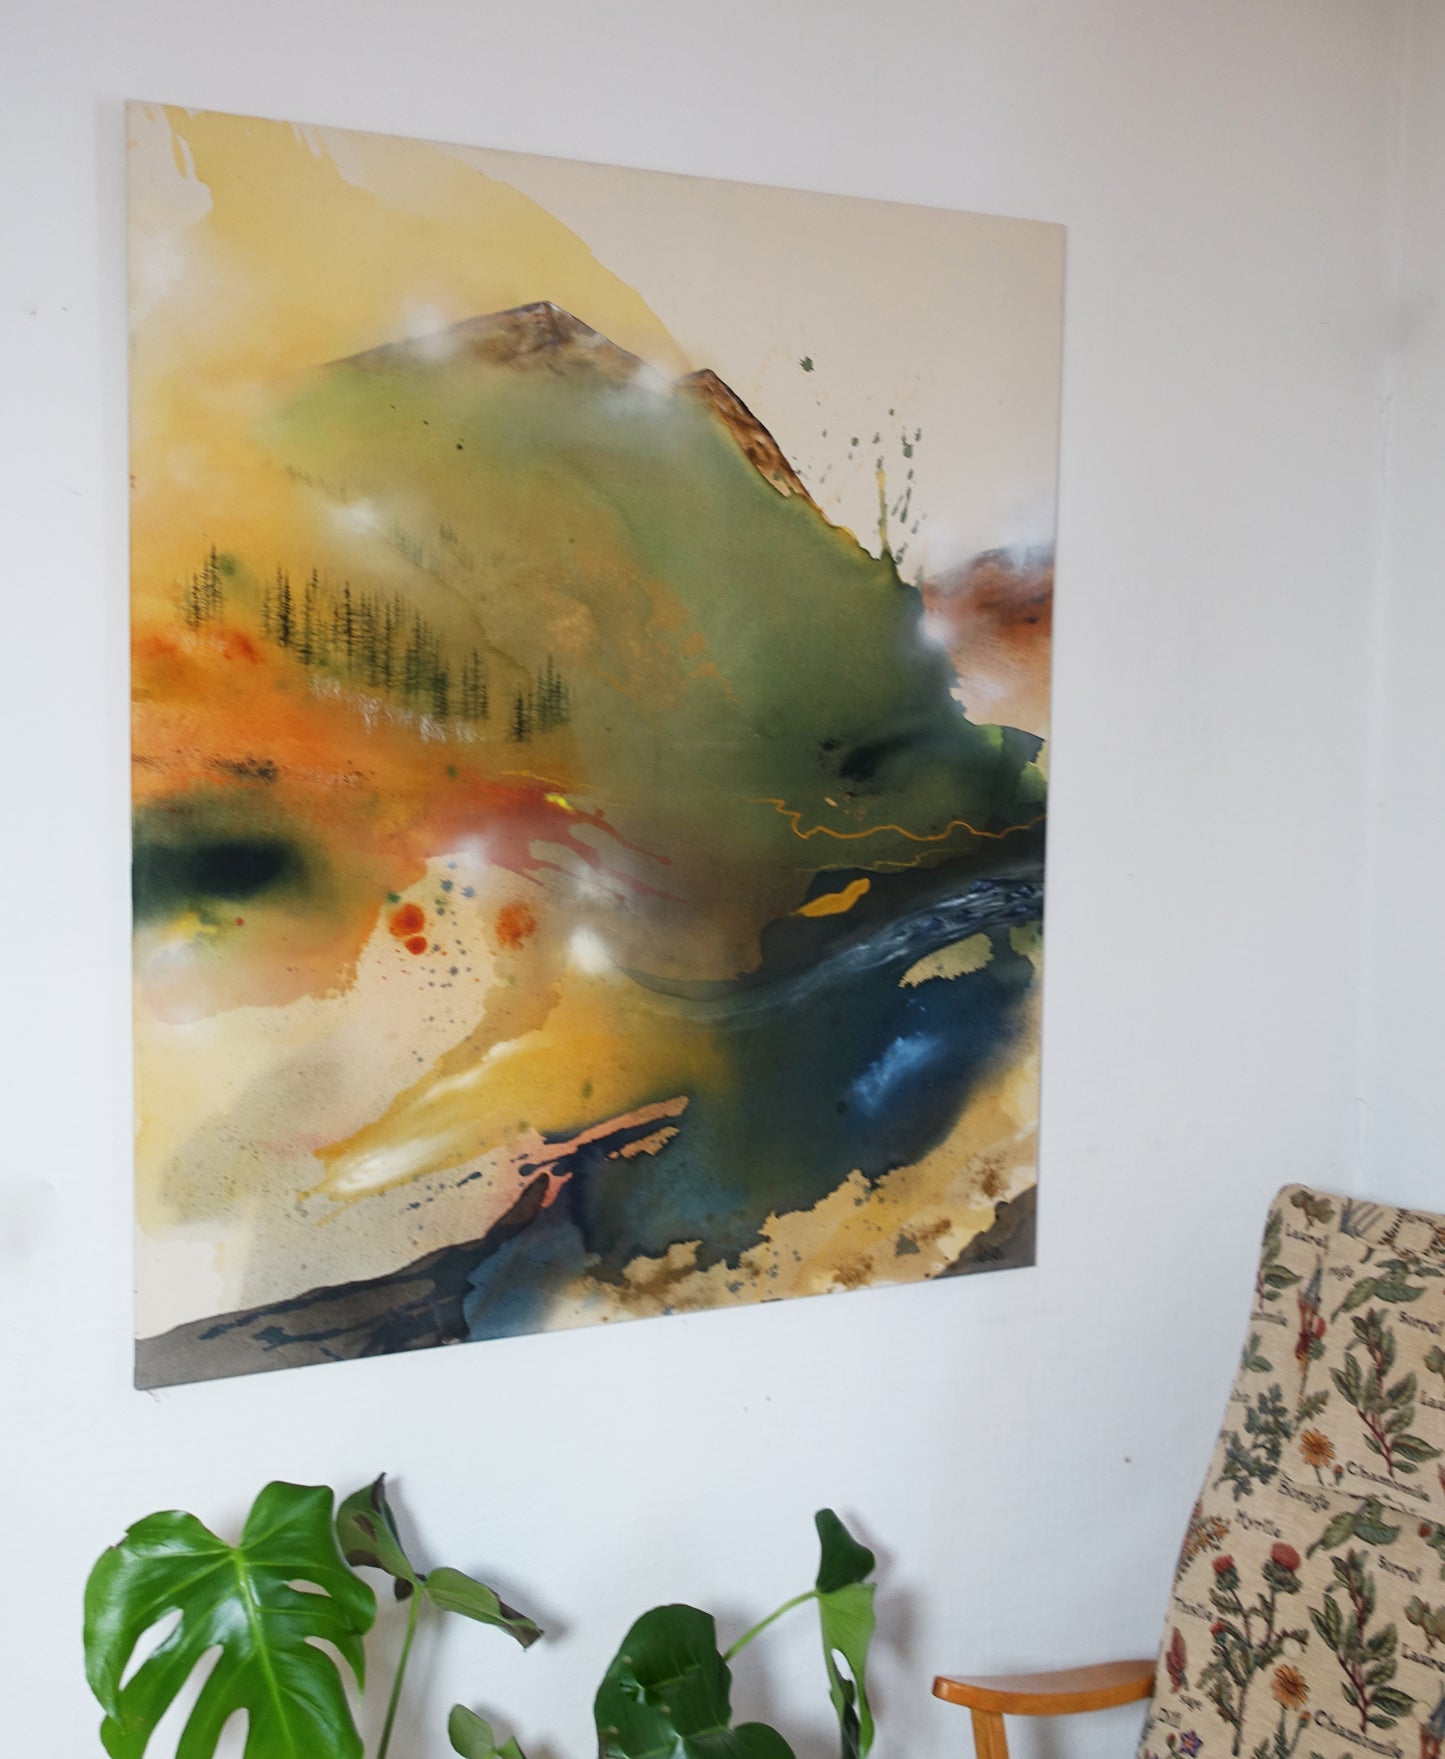 Original painting "At the edge of the mountain"